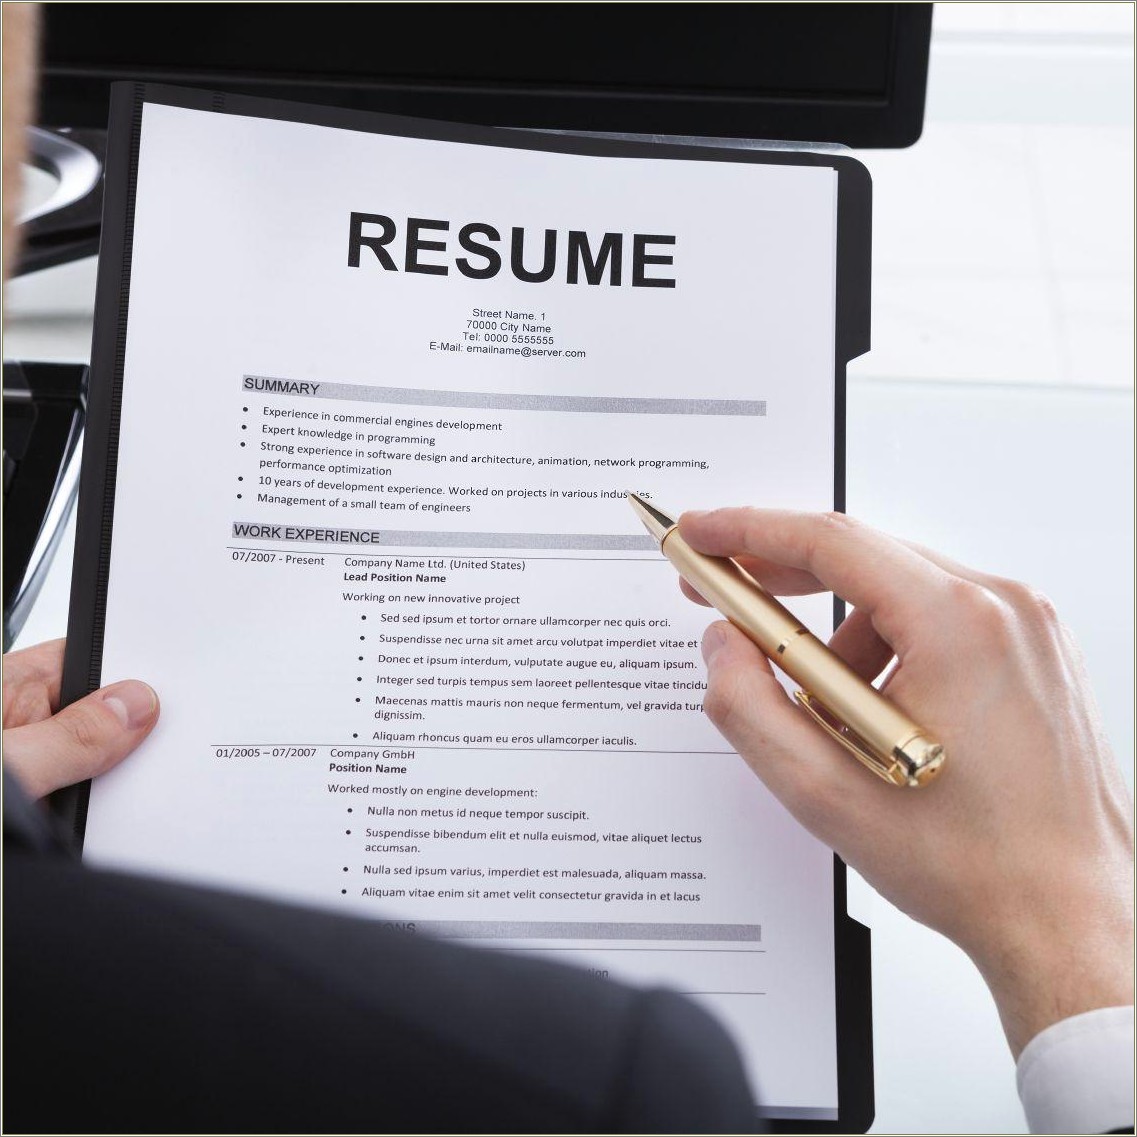 Networking Skills To Put On A Resume